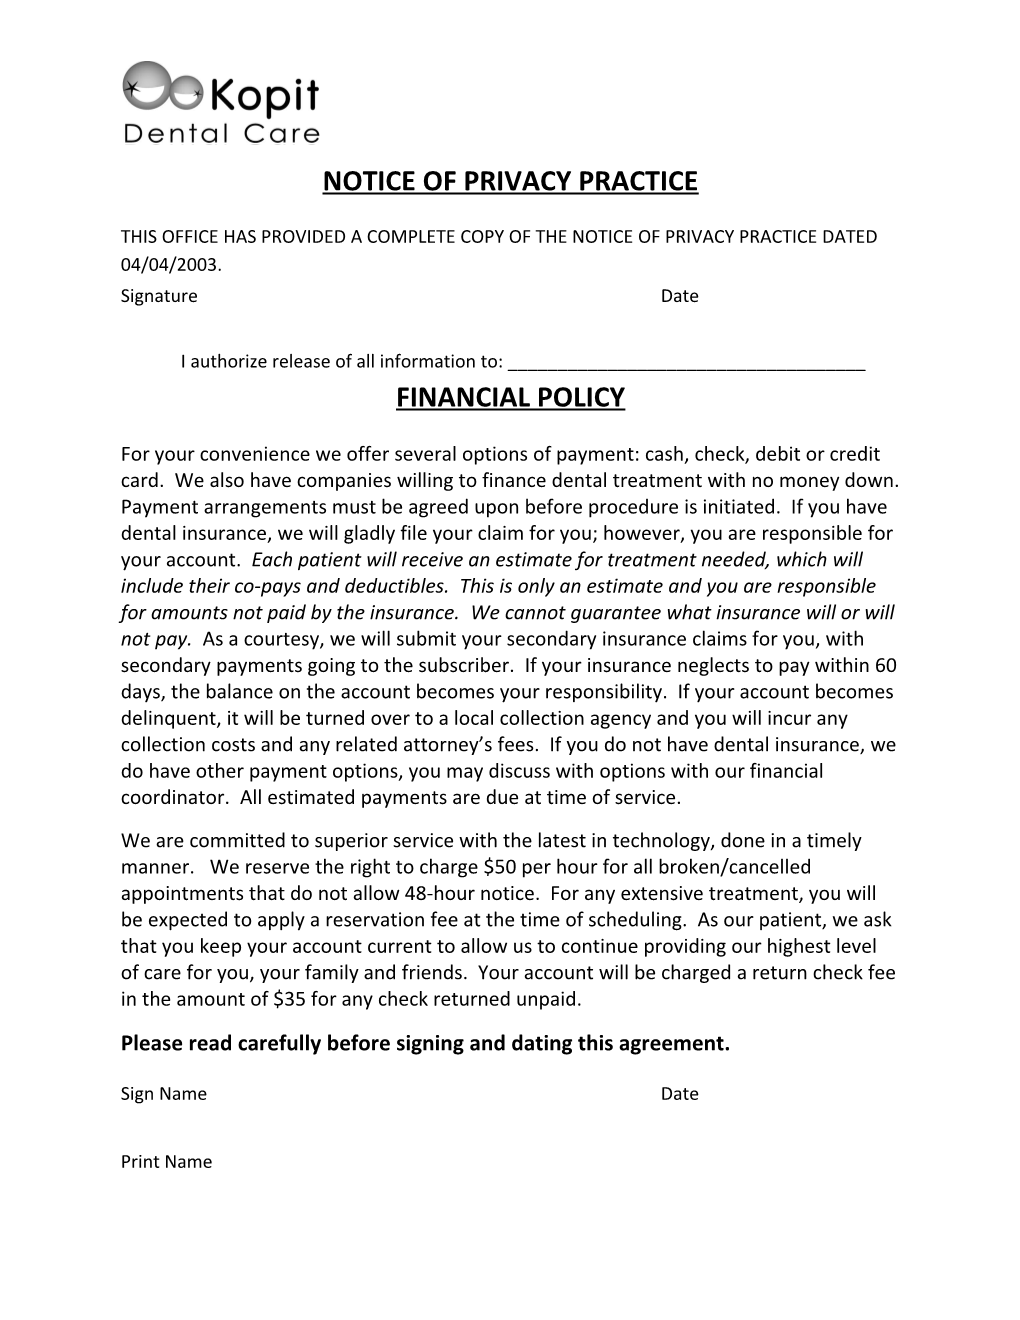 Notice of Privacy Practice